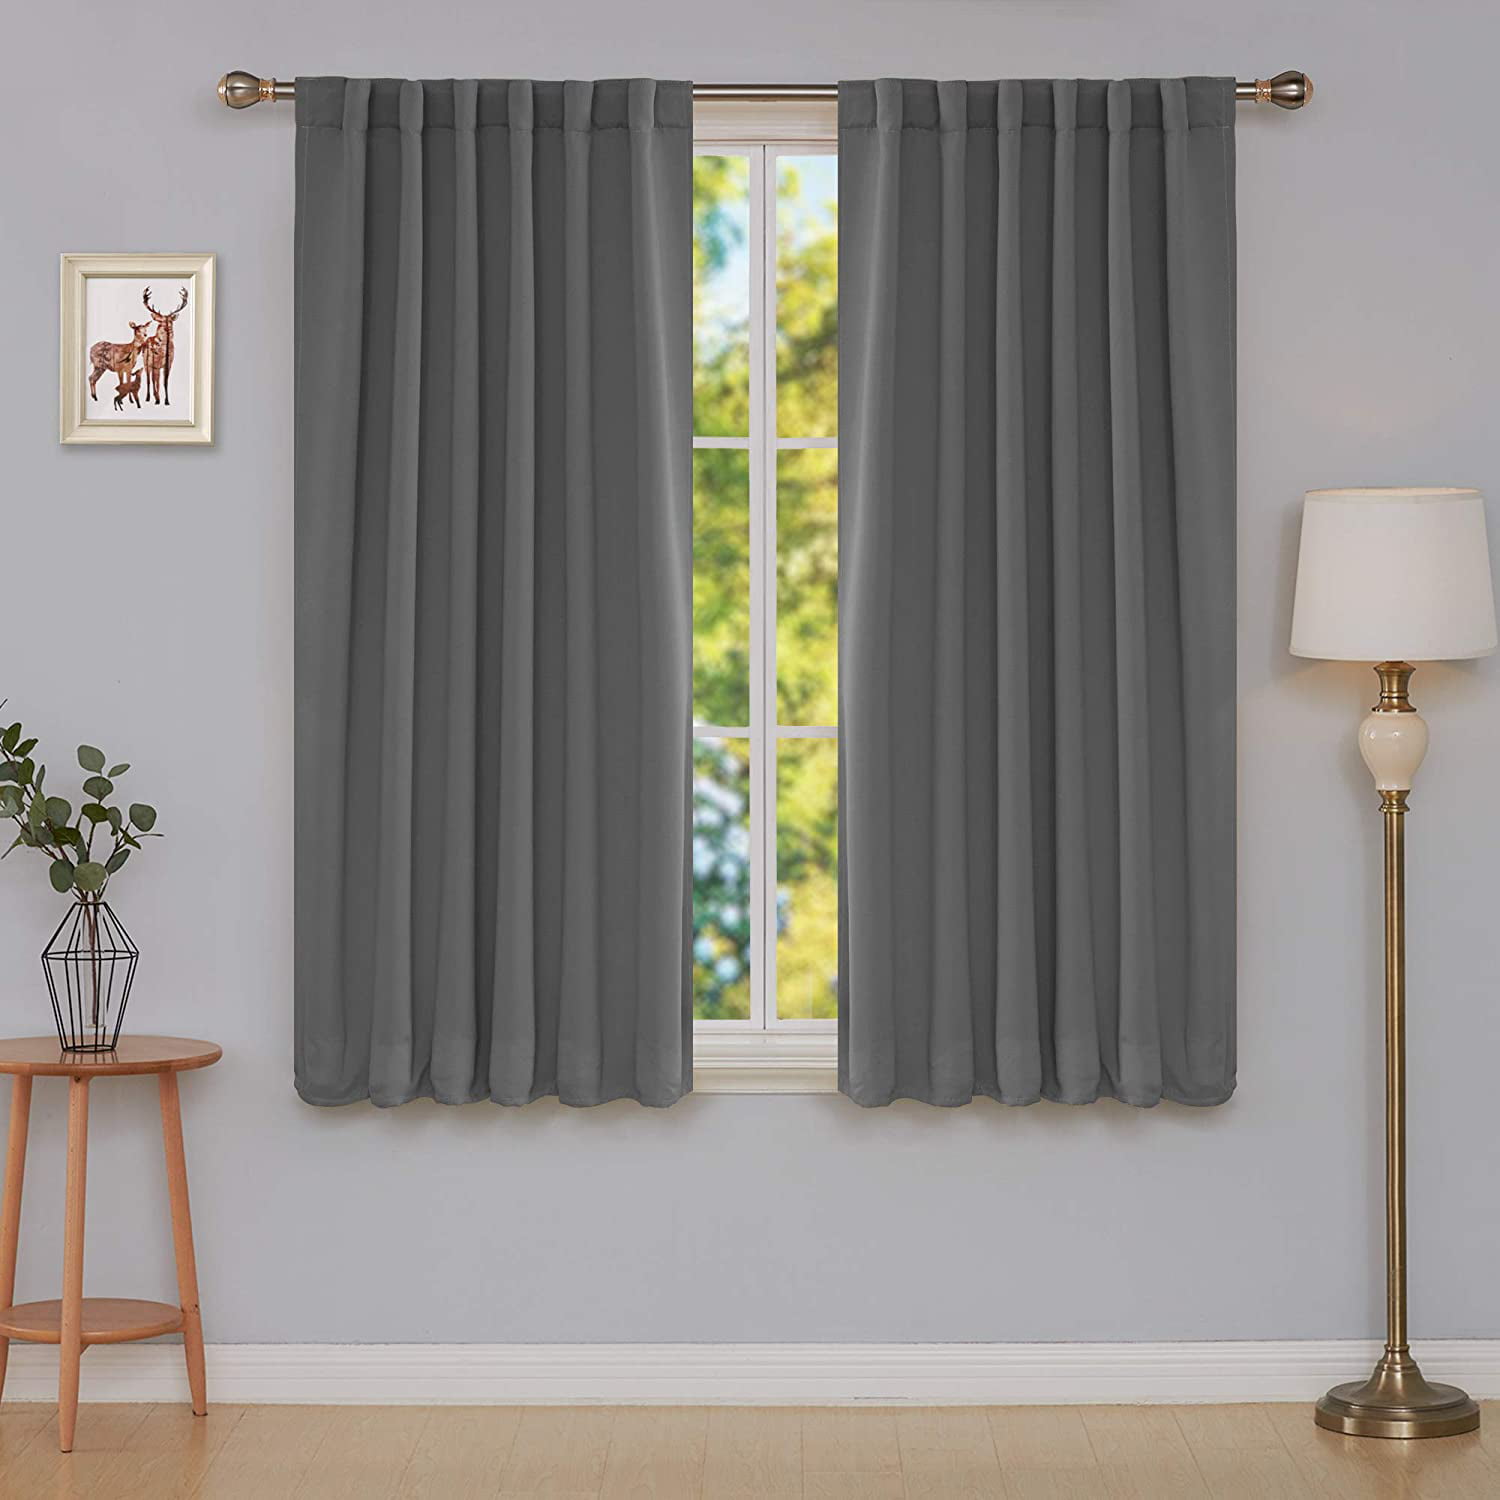 Deconovo Blackout Curtains for Kitchen Window Back Tab and Rod Pocket